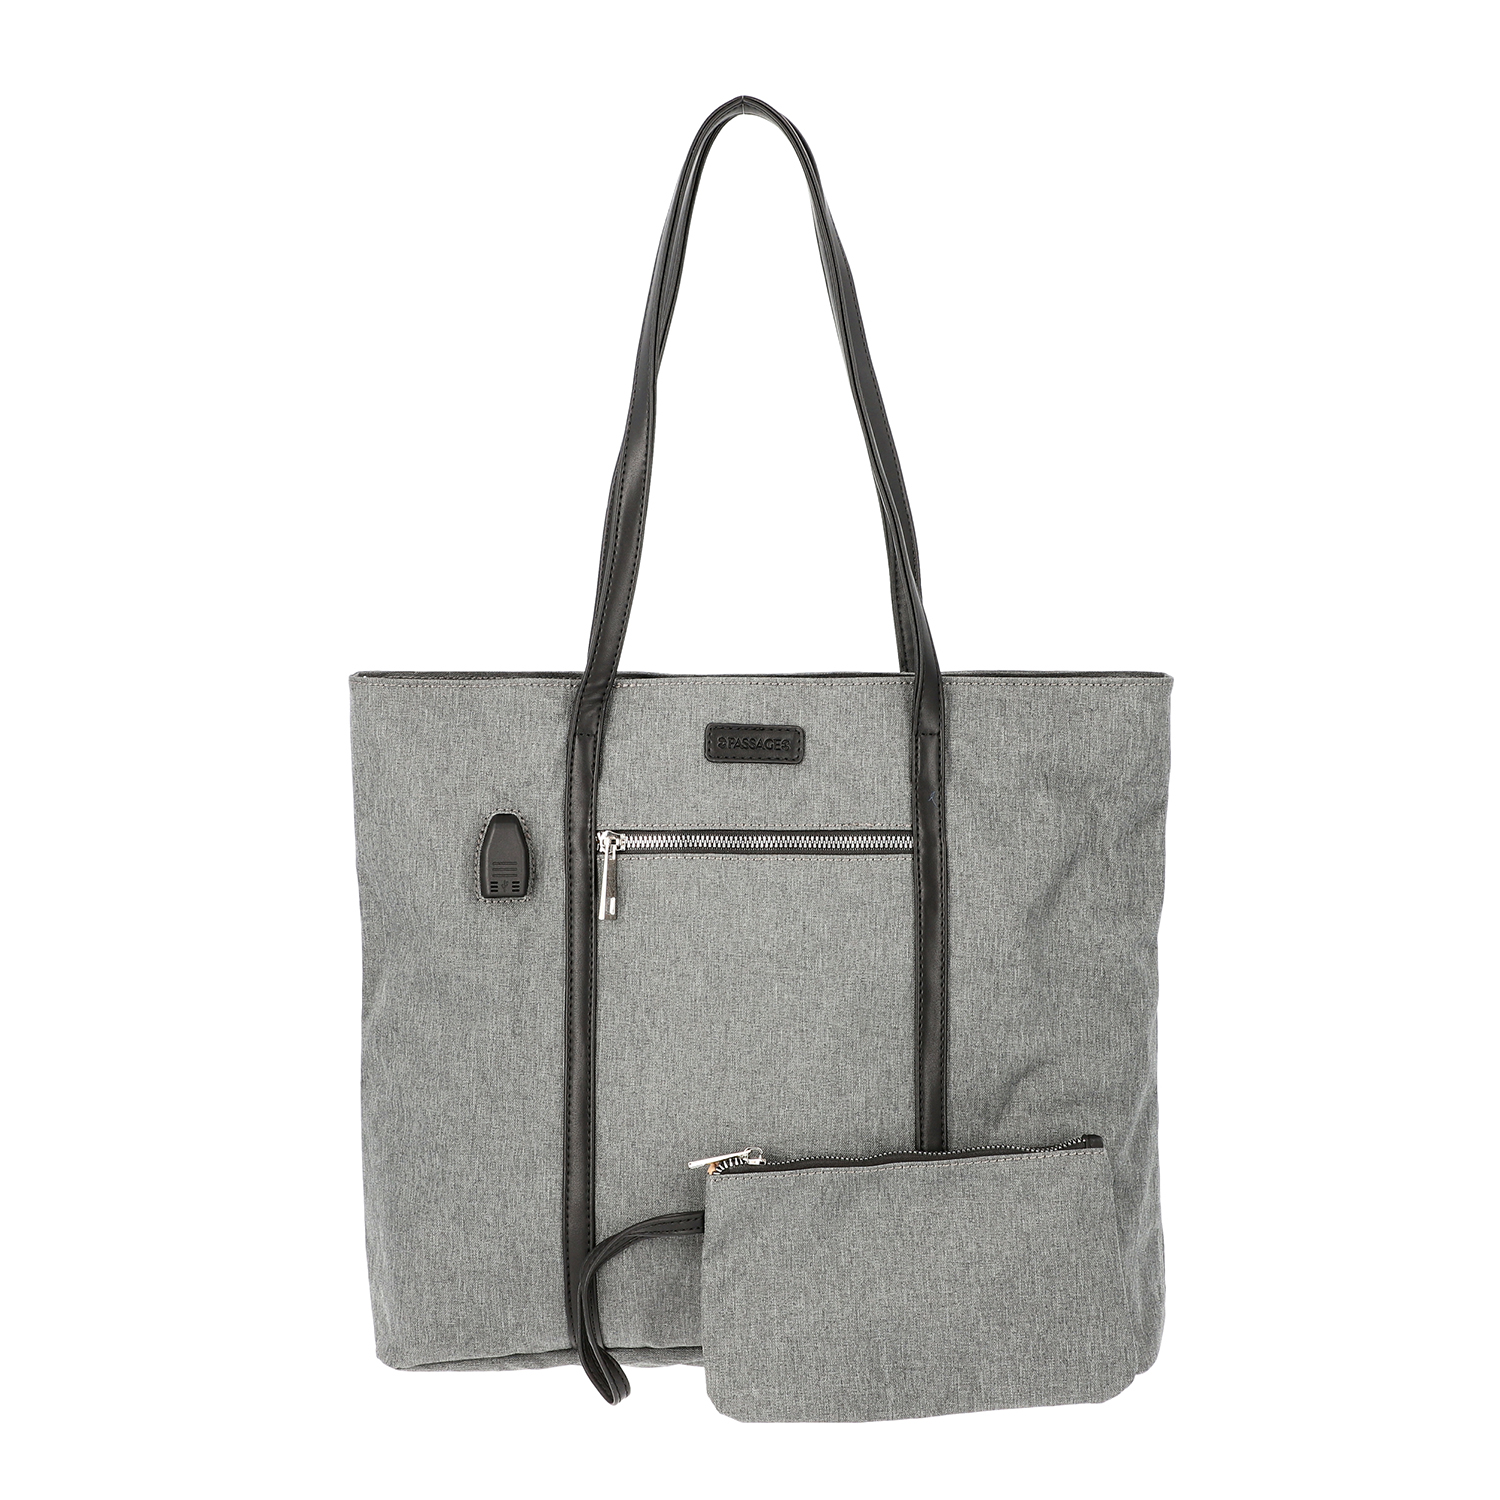 Combo with Tote Handbag and Coin Purse in Grey Colour